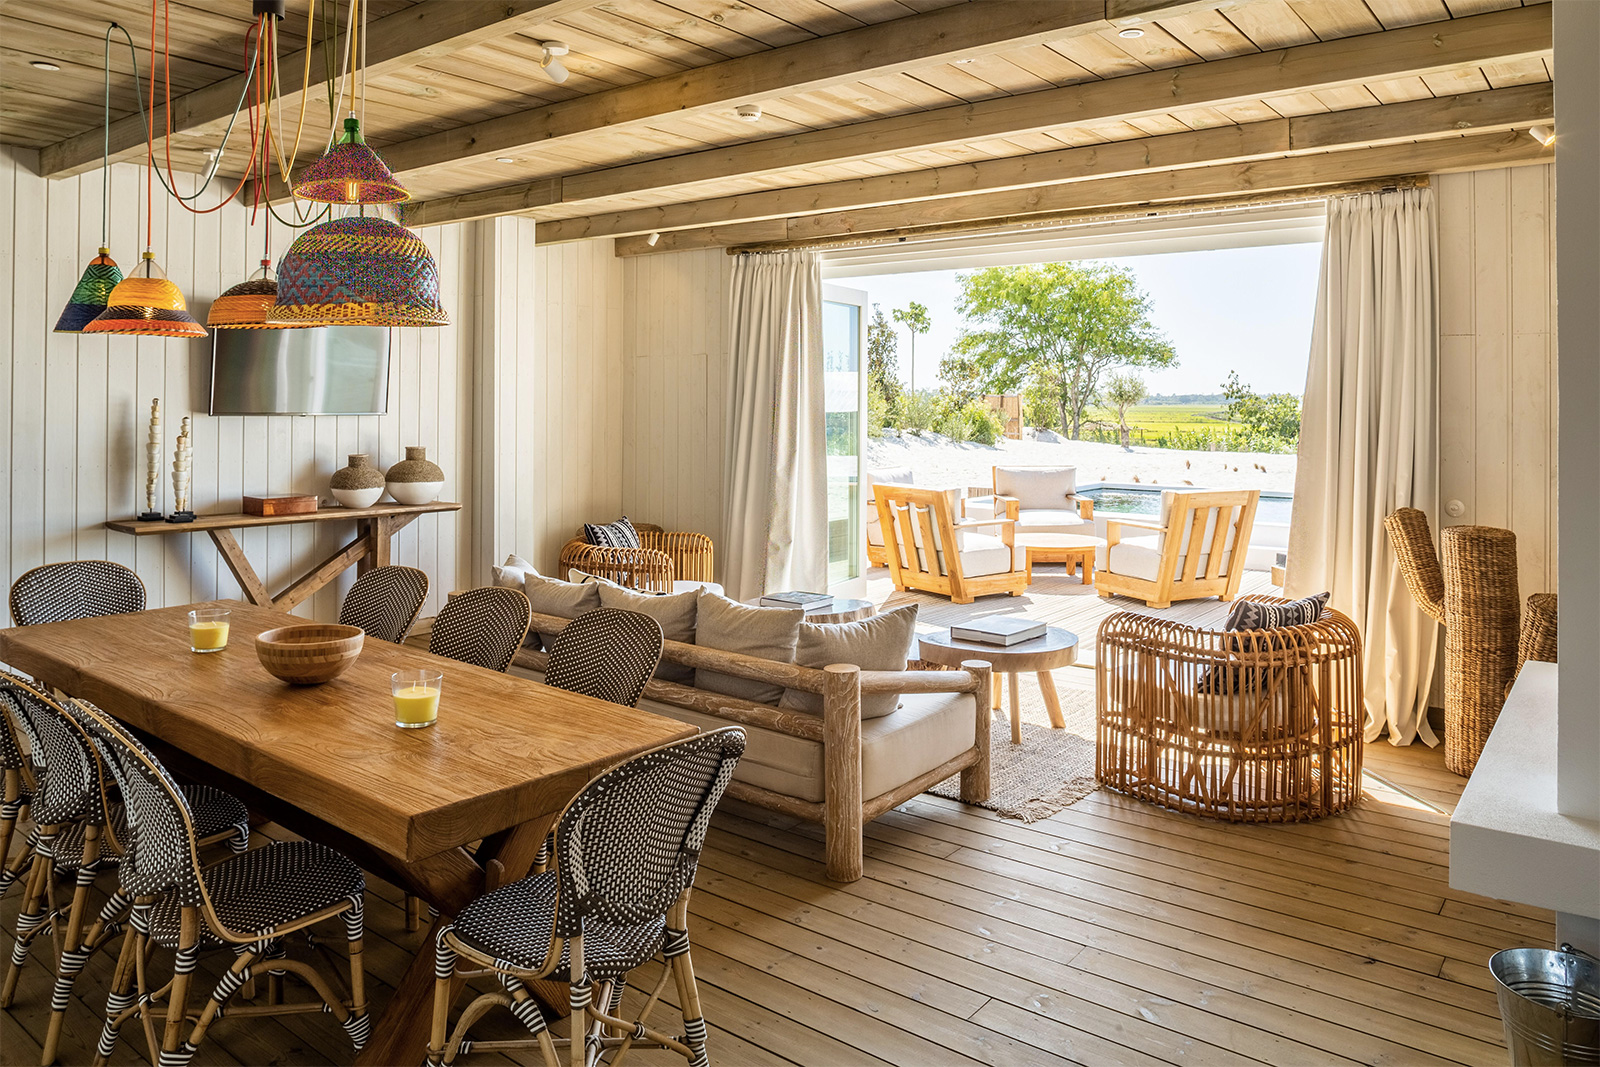 Quinta da Comporta takes cues from the area’s bohemian character for its interiors.